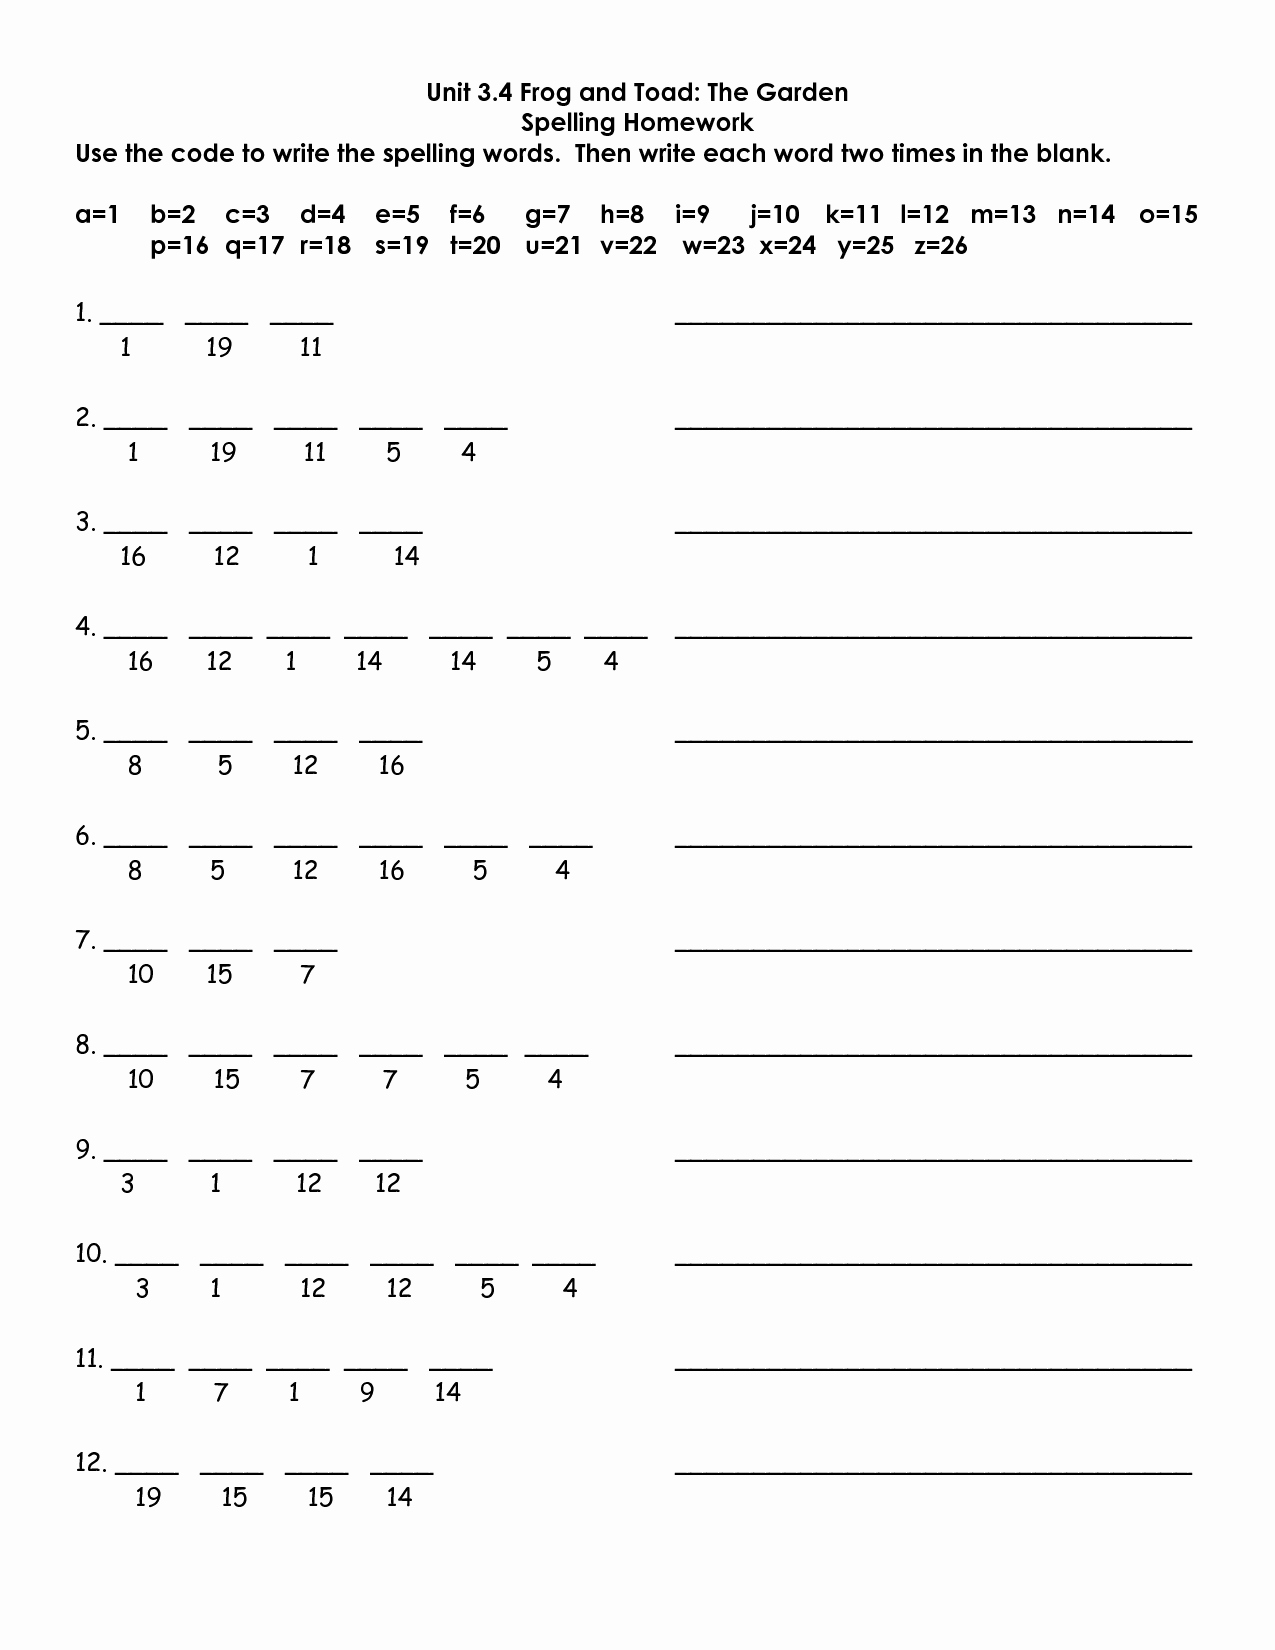 Cracking the Code Math Worksheets New 12 Best Of Crack the Code Worksheets Worksheet